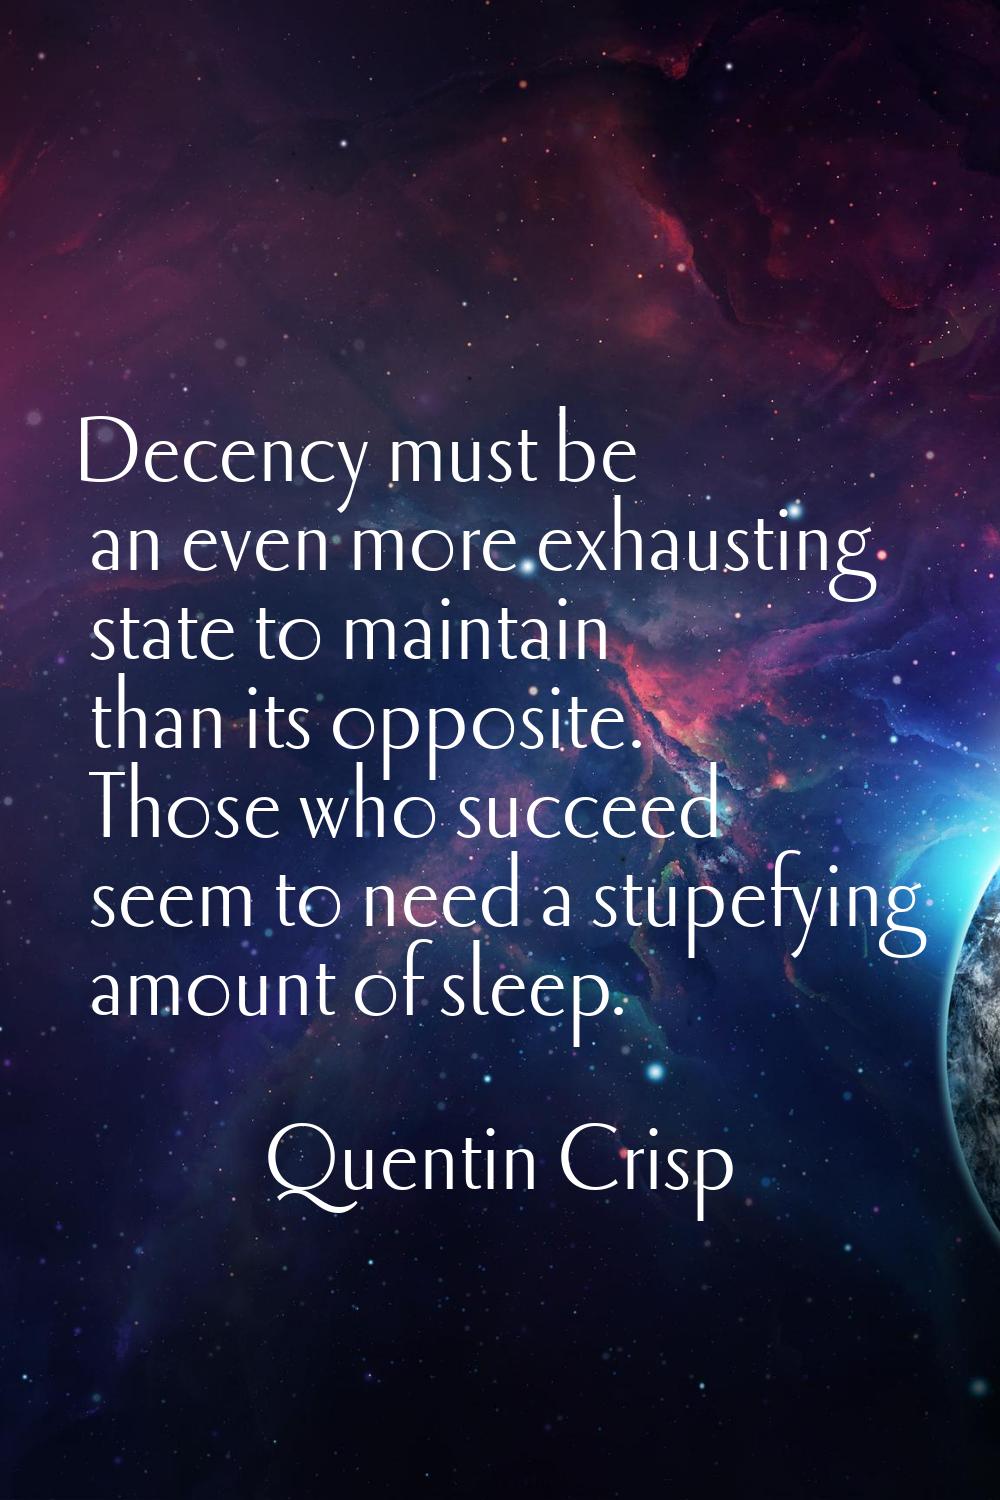 Decency must be an even more exhausting state to maintain than its opposite. Those who succeed seem